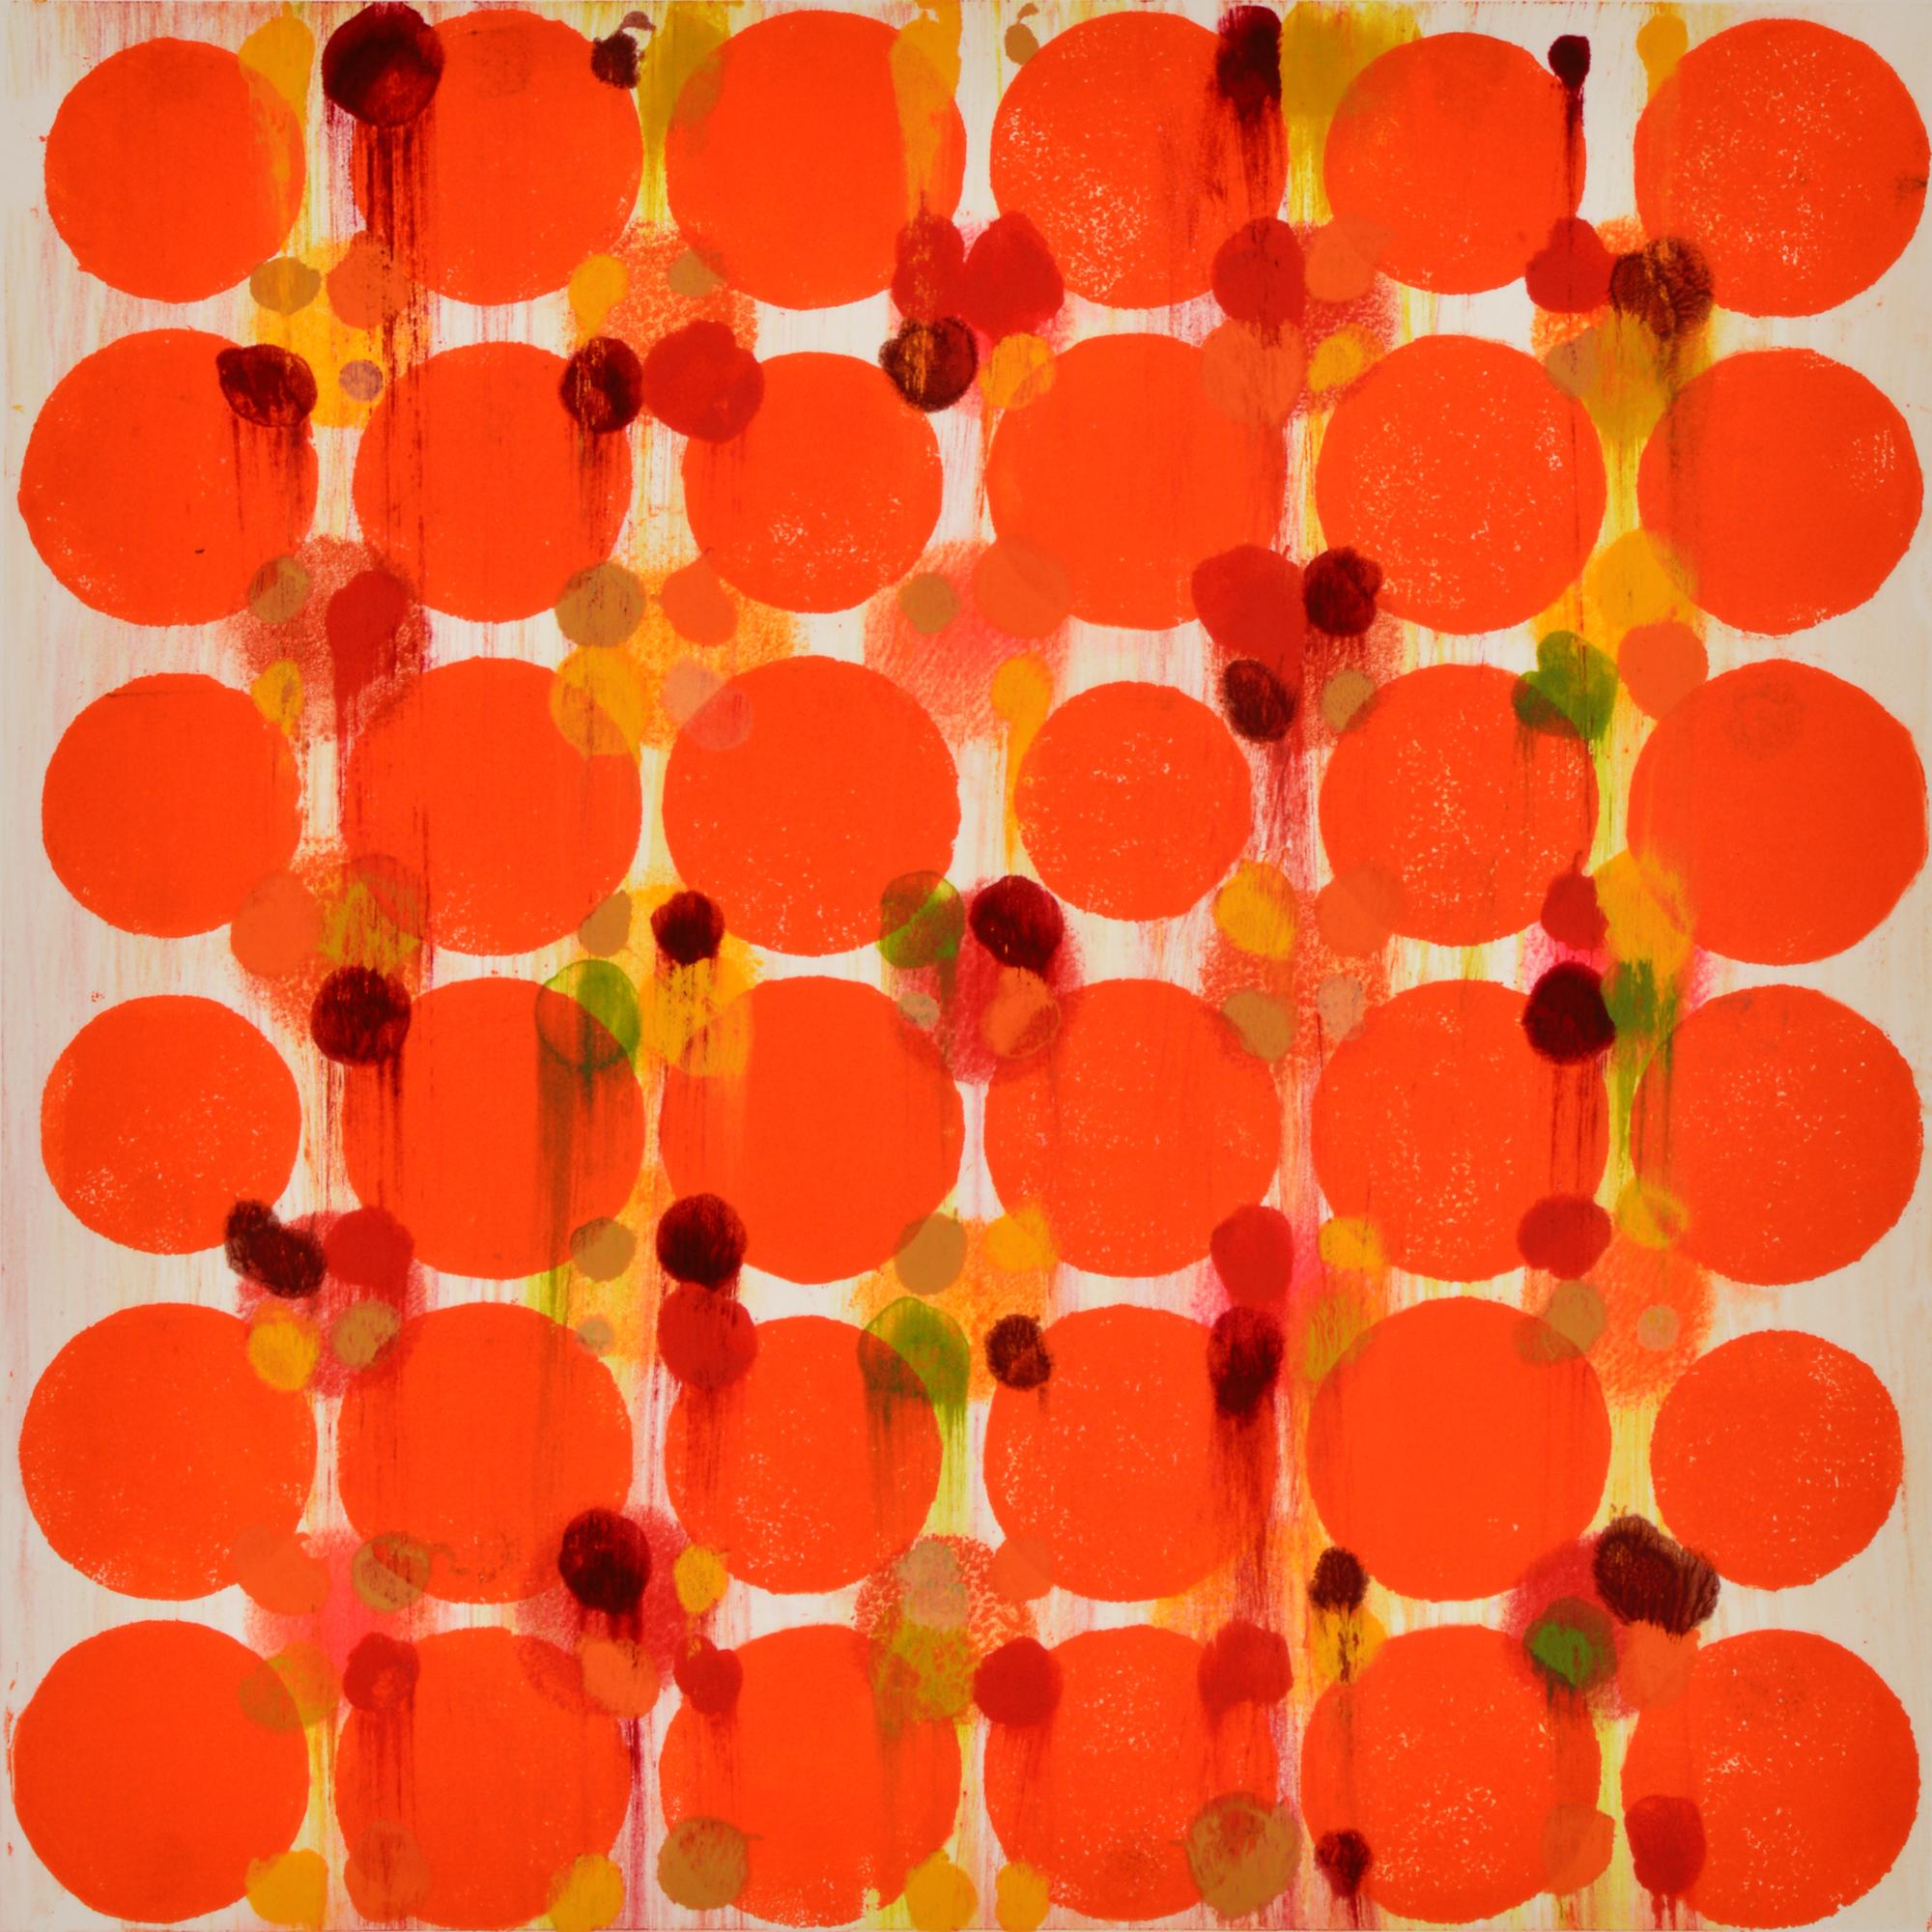 Janine Wong Abstract Print - "Dot Variant 14", color dots, abstract, pattern, orange, yellow, warm